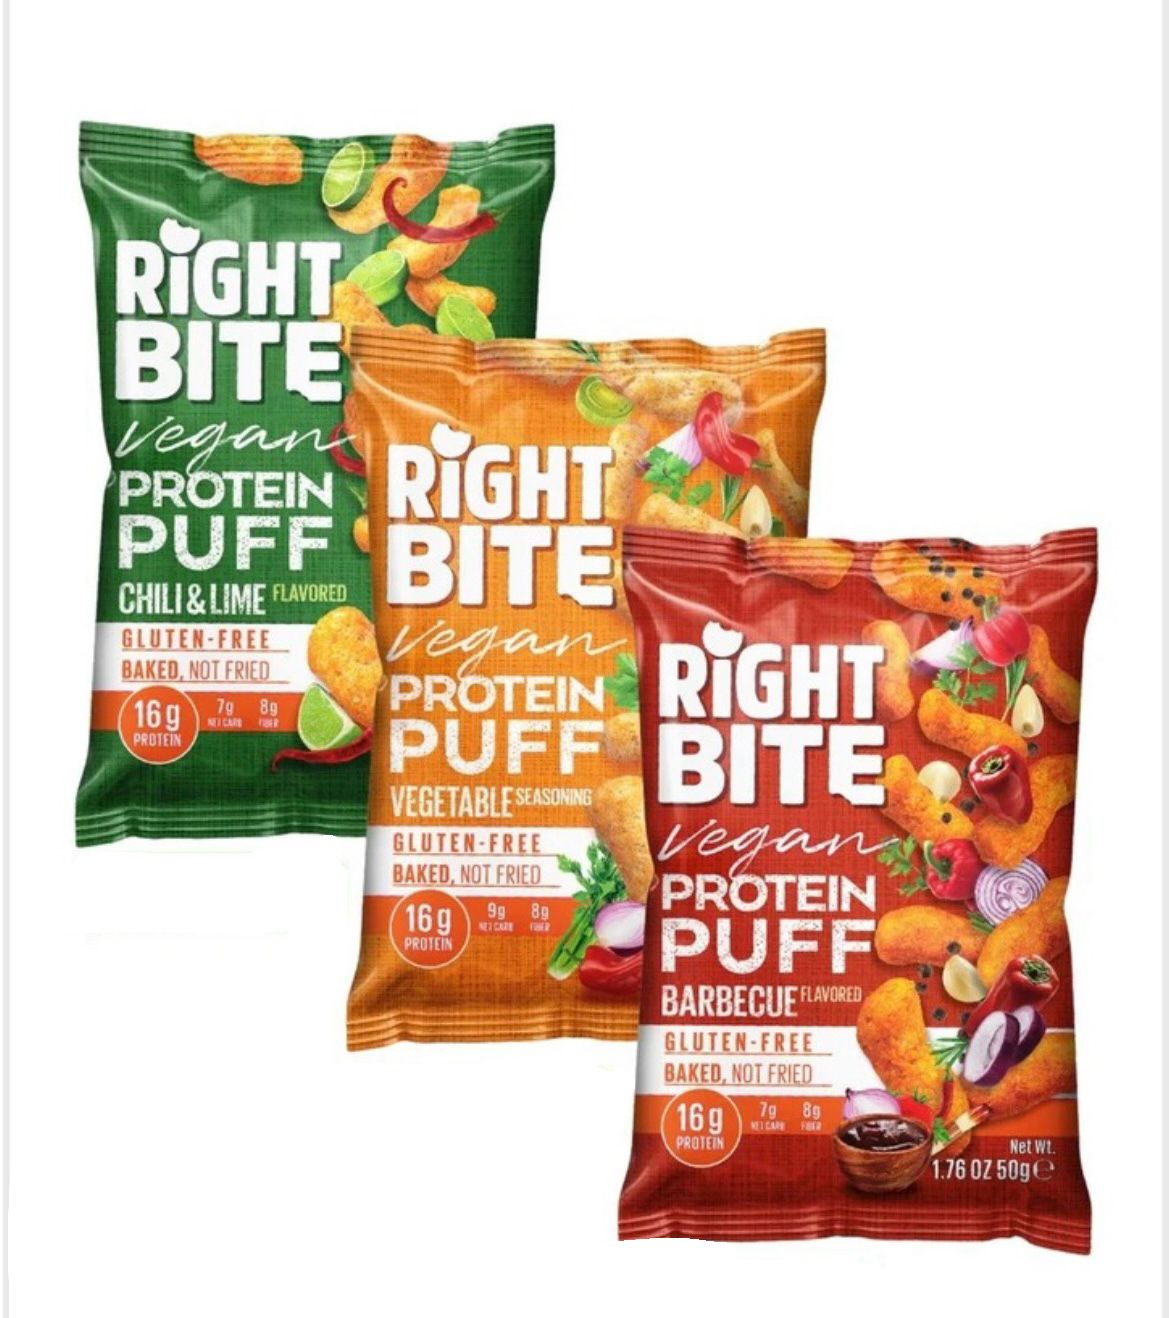 Bite And More Right Bite Vegan GF Protein Puffs 1 bag Bite and More Top Nutrition Canada